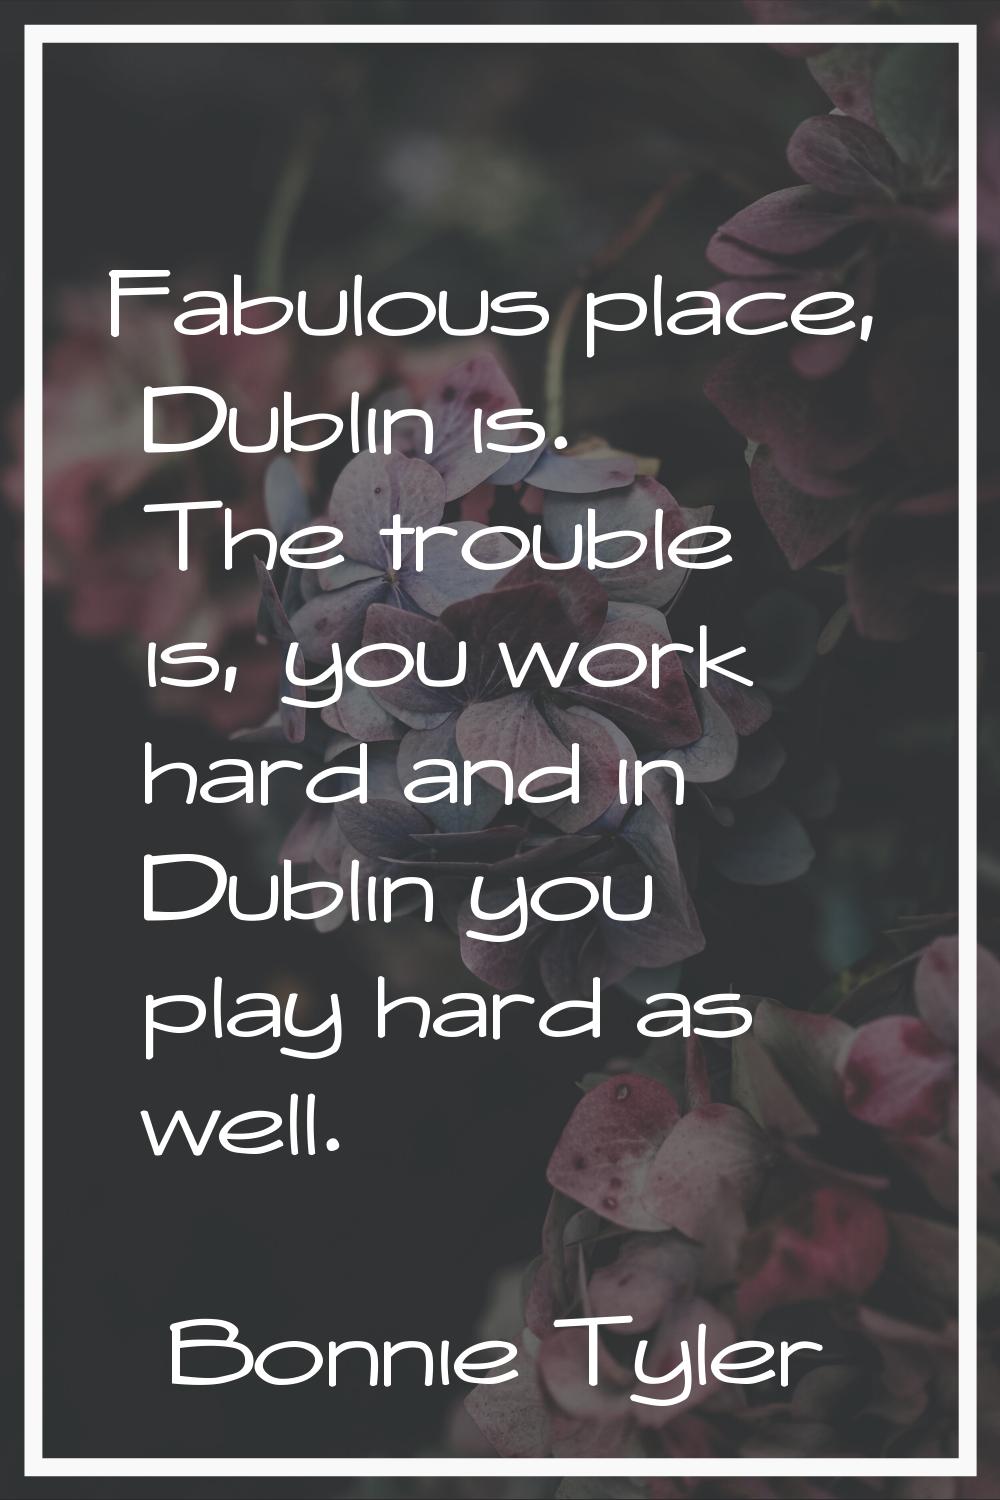 Fabulous place, Dublin is. The trouble is, you work hard and in Dublin you play hard as well.